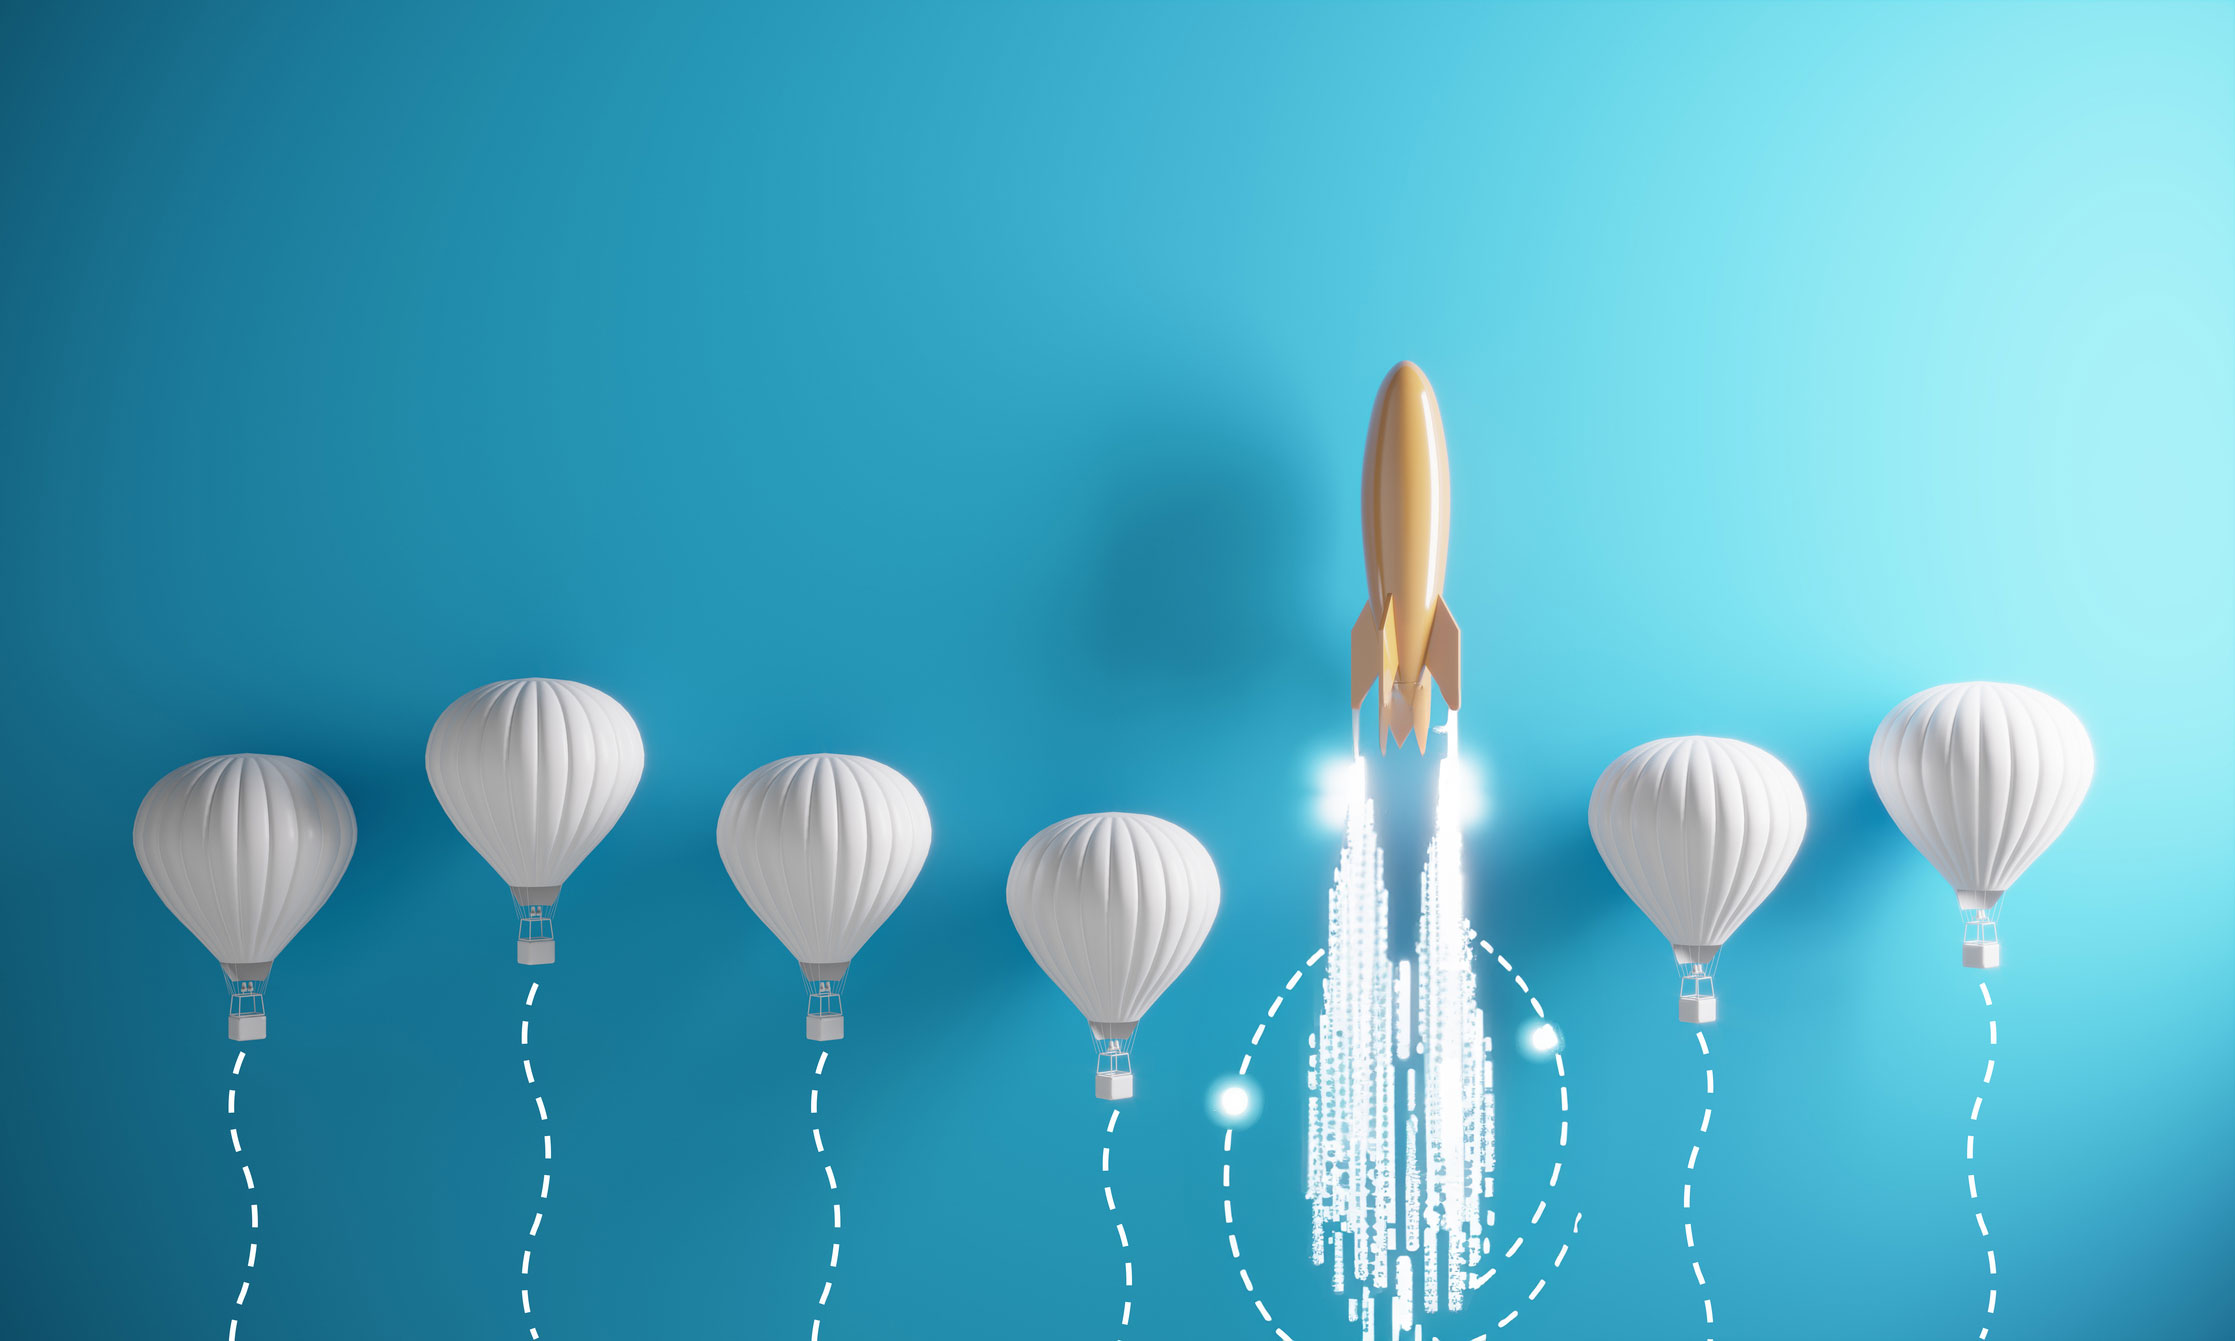 Stand out and soar to success: a yellow rocket speeds past a cluster of white hot air balloons, symbolizing breakthrough performance with Mentora.